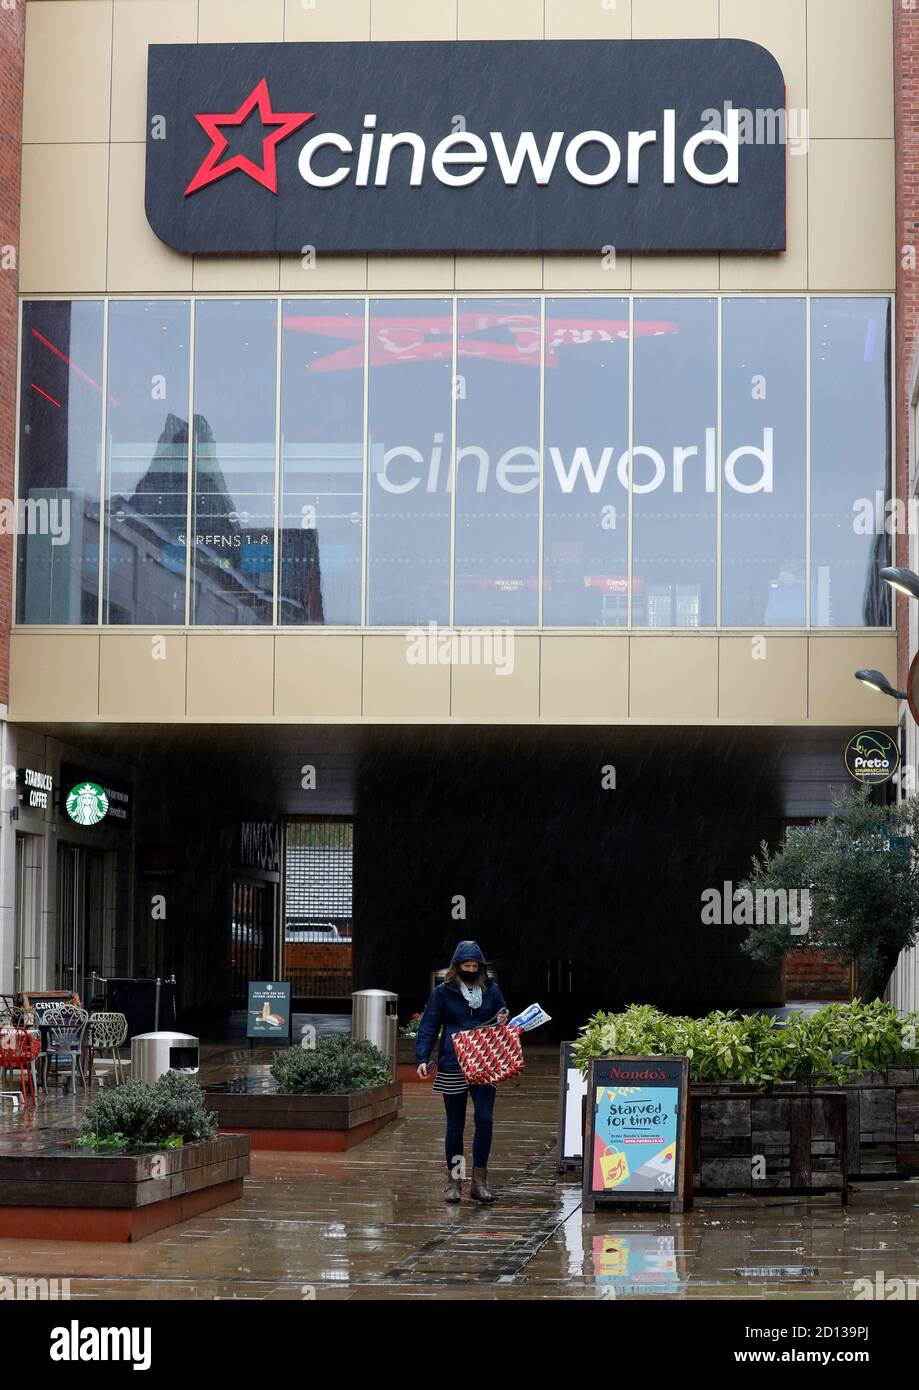 Loughborough, Leicestershire, UK. 5th October 2020. A woman walks past a Cineworld cinema after it was announced that because of continuing disruption from the coronavirus pandemic its screens would close until next year. Credit Darren Staples/Alamy Live News. Stock Photo